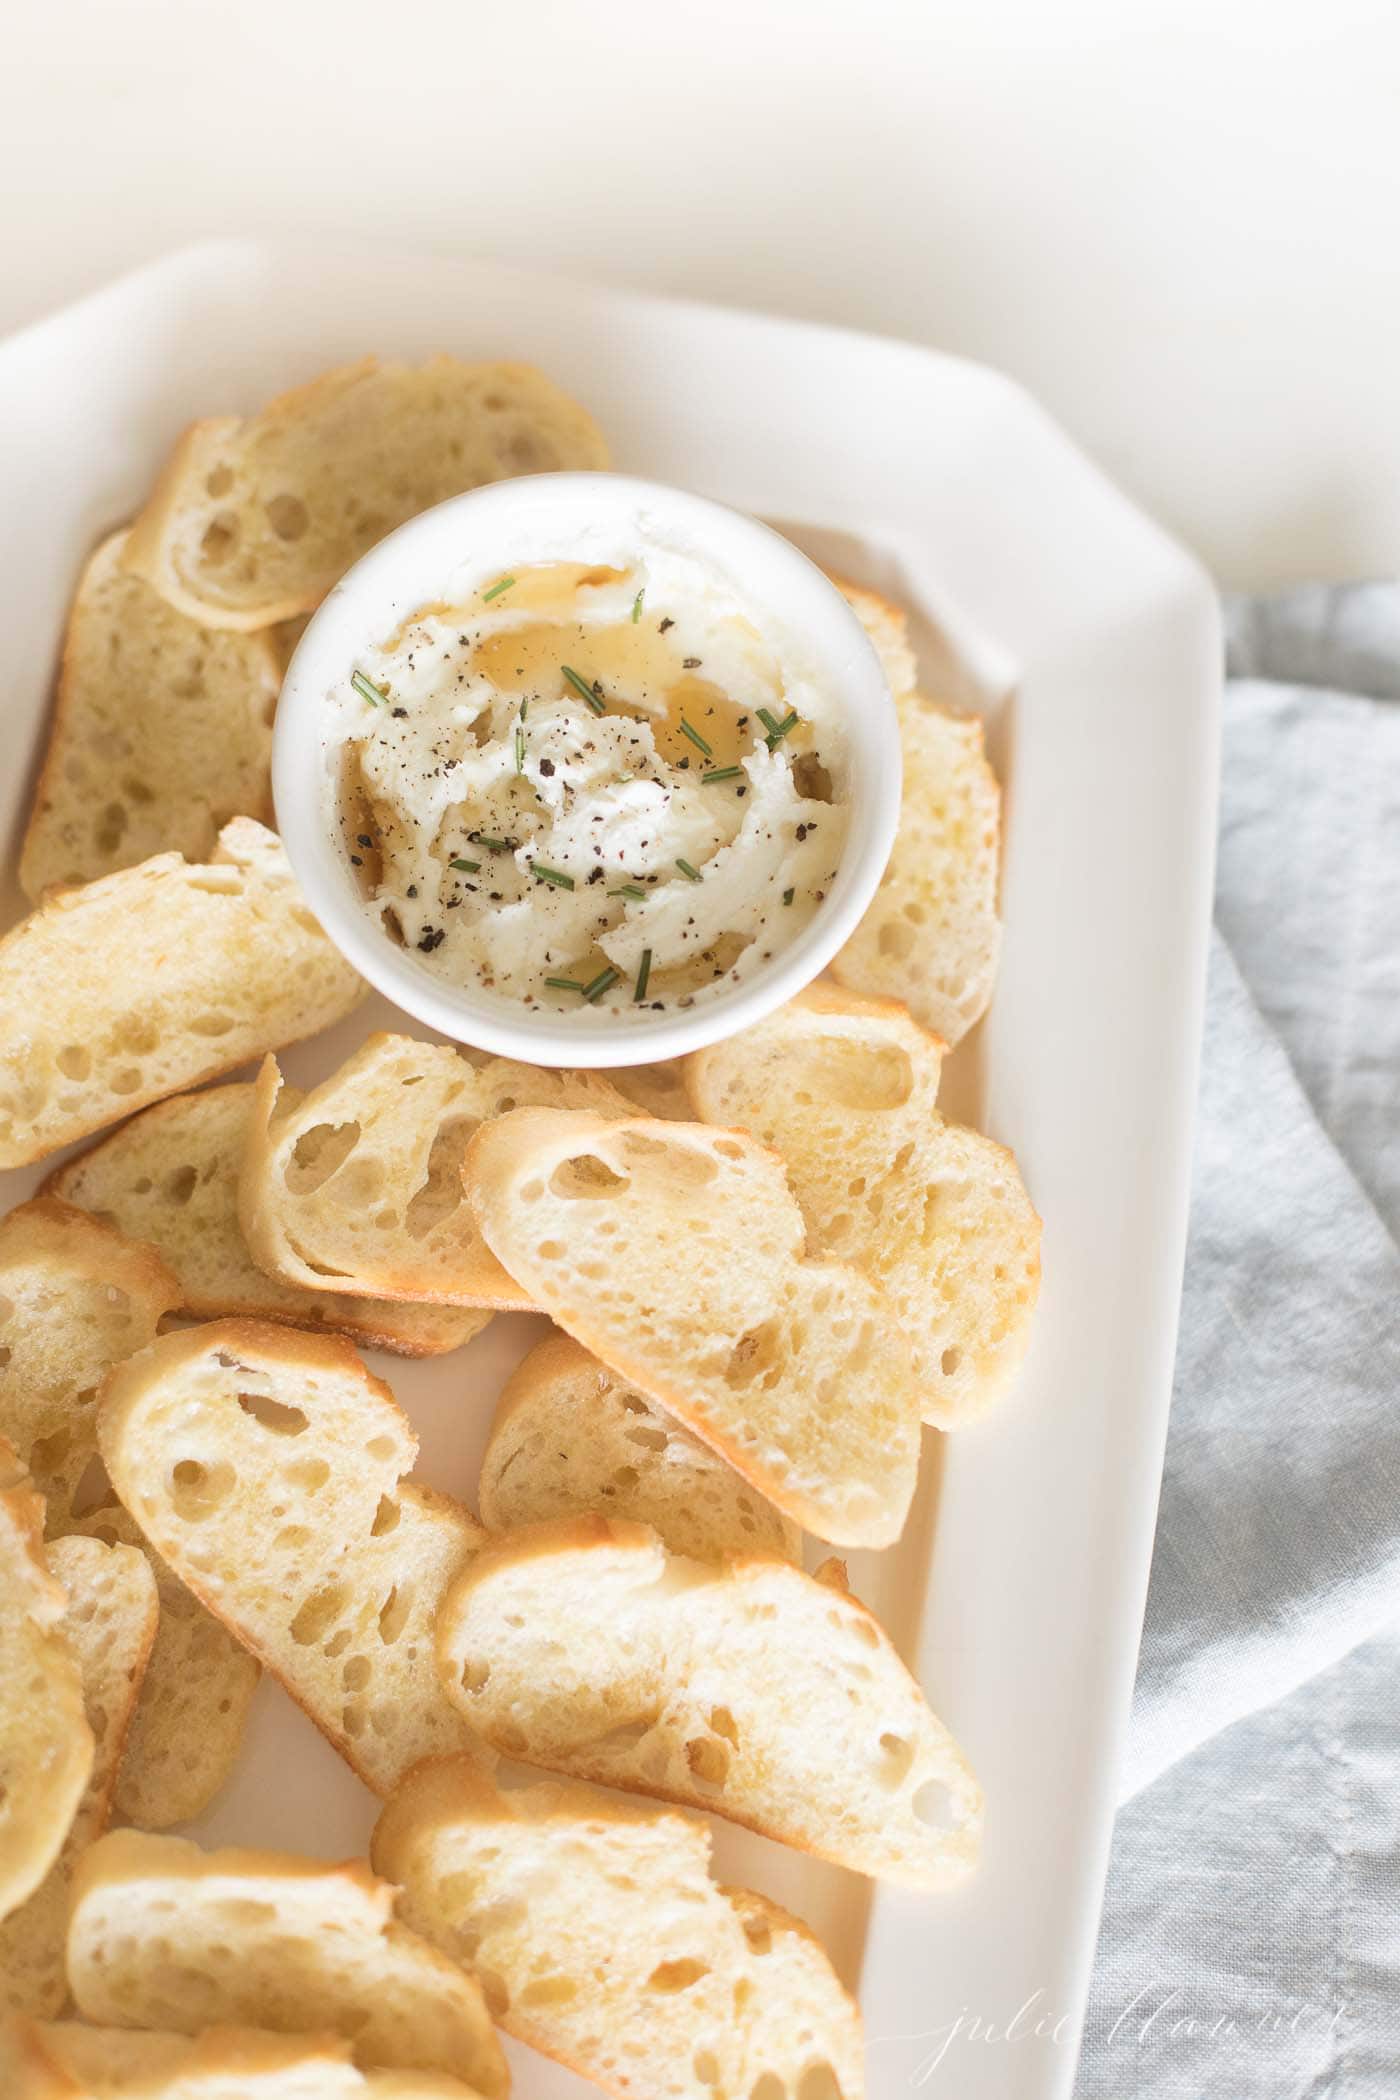 goat cheese spread in a white bowl surrounded by sliced crostini.